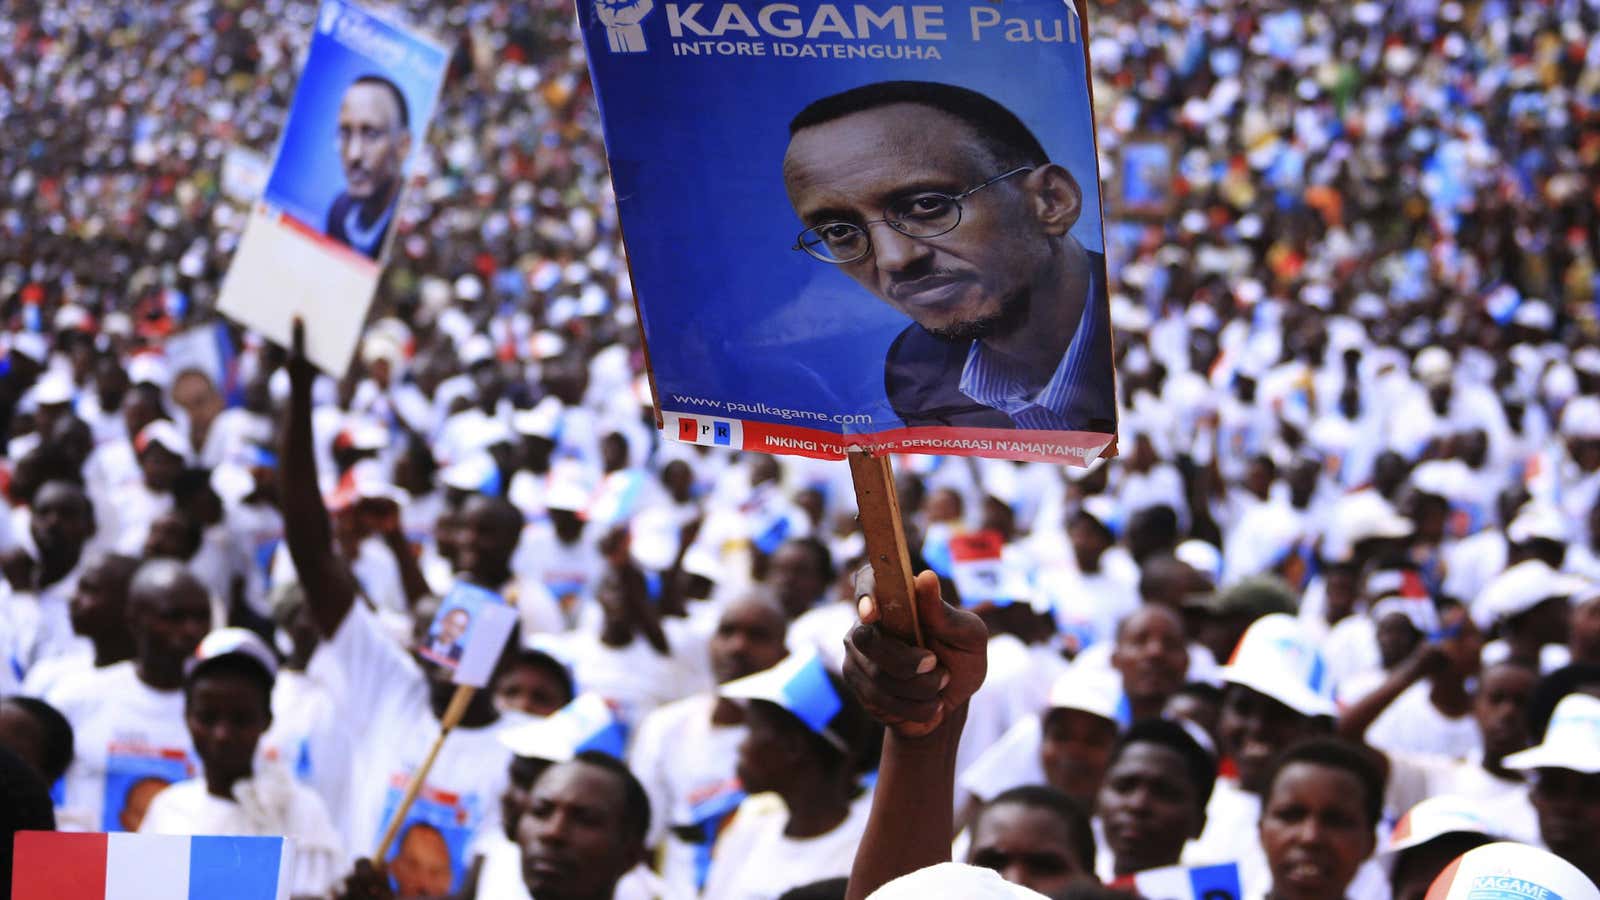 Kagame says he will run for a third term if that’s what the people want.